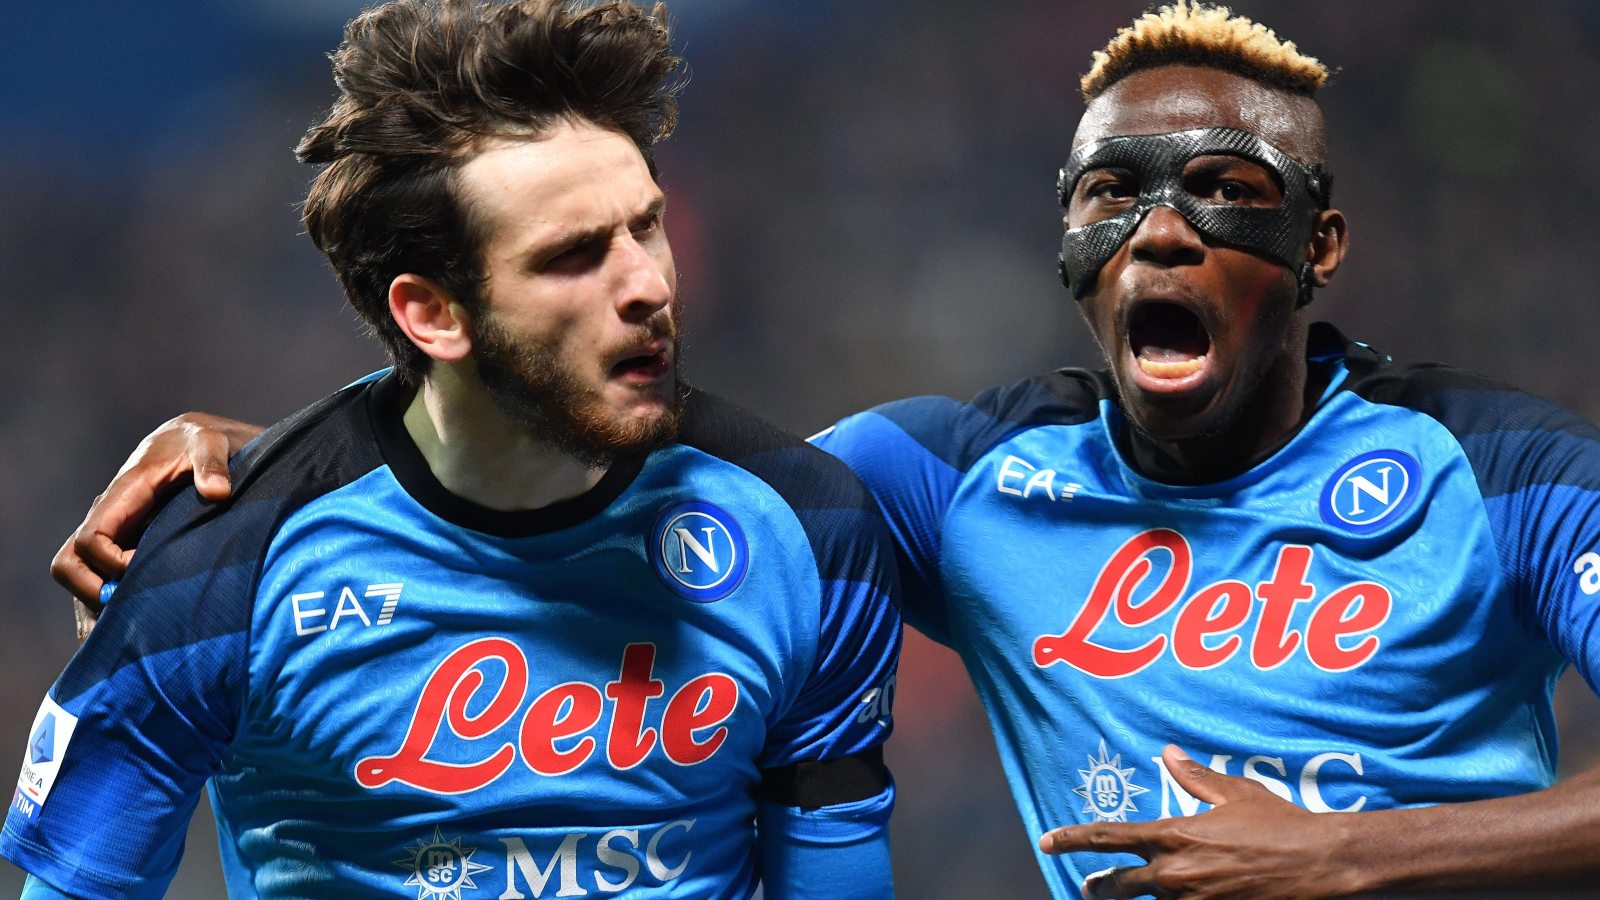 Victor Osimhen and Khvicha Kvaratskhelia finished in the top 20 in the Ballon d’Or after leading Napoli to their third Scudetto last season.